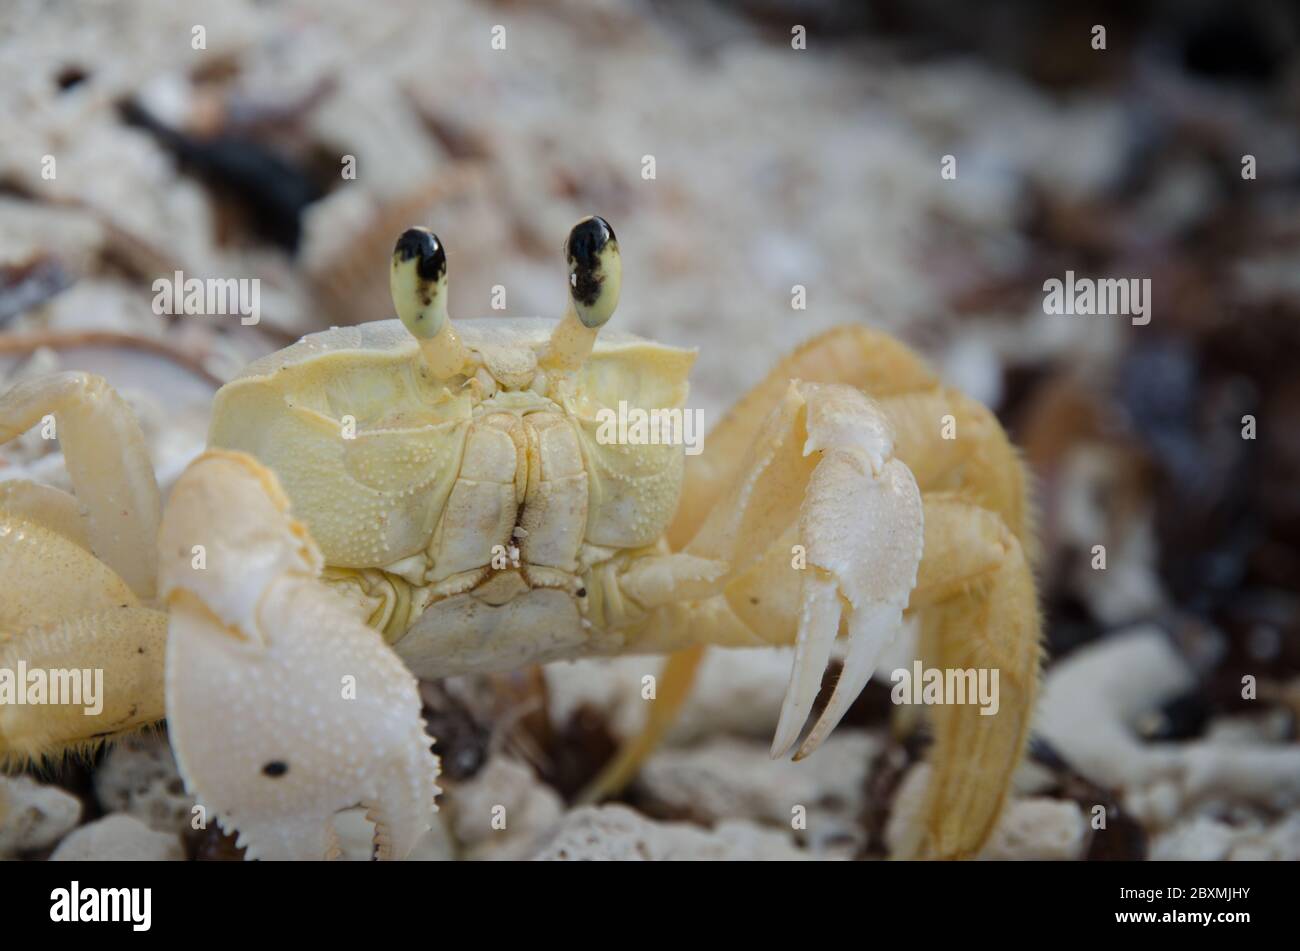 Ghost crabs have the ability to change colors to match their surroundings. They can even match the specific colors of the grains of sand in their habi Stock Photo